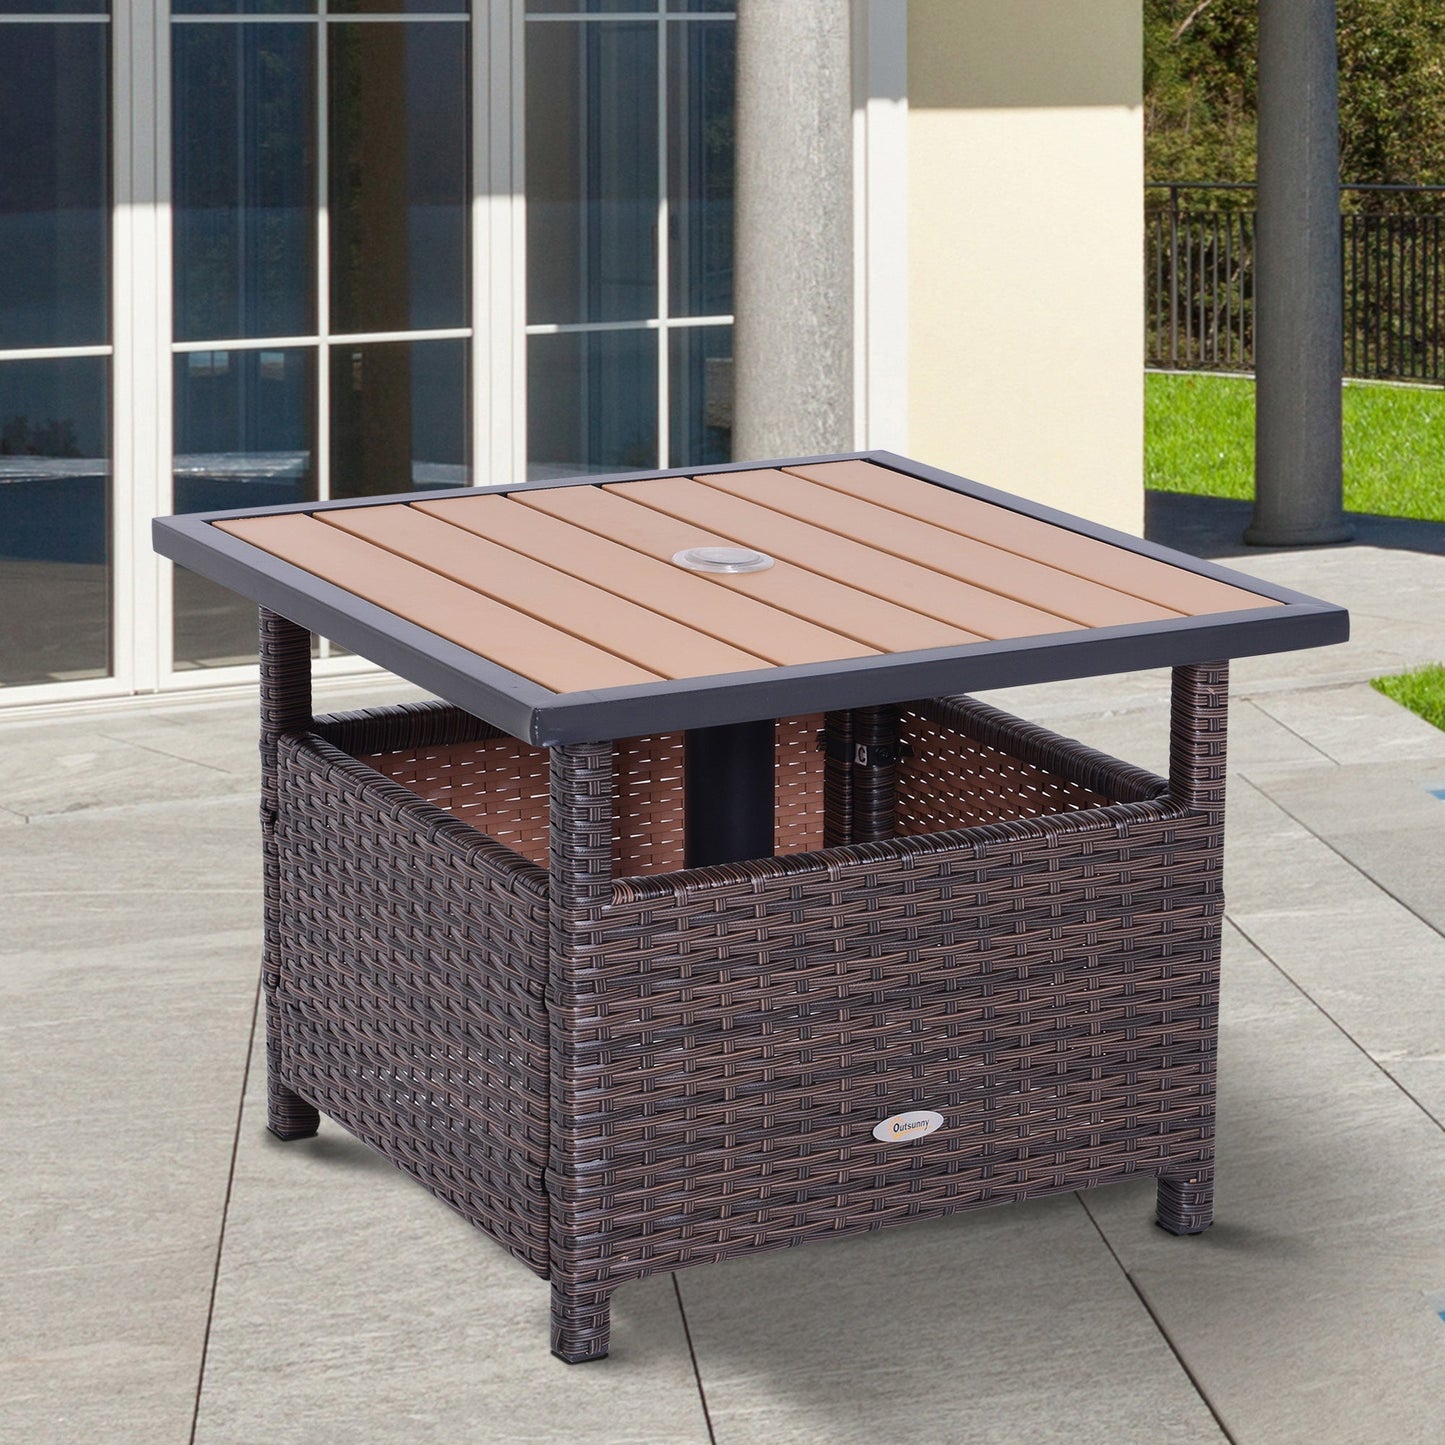 Outdoor and Garden-Rattan Wicker Outdoor Accent Table with Umbrella Insert - Outdoor Style Company